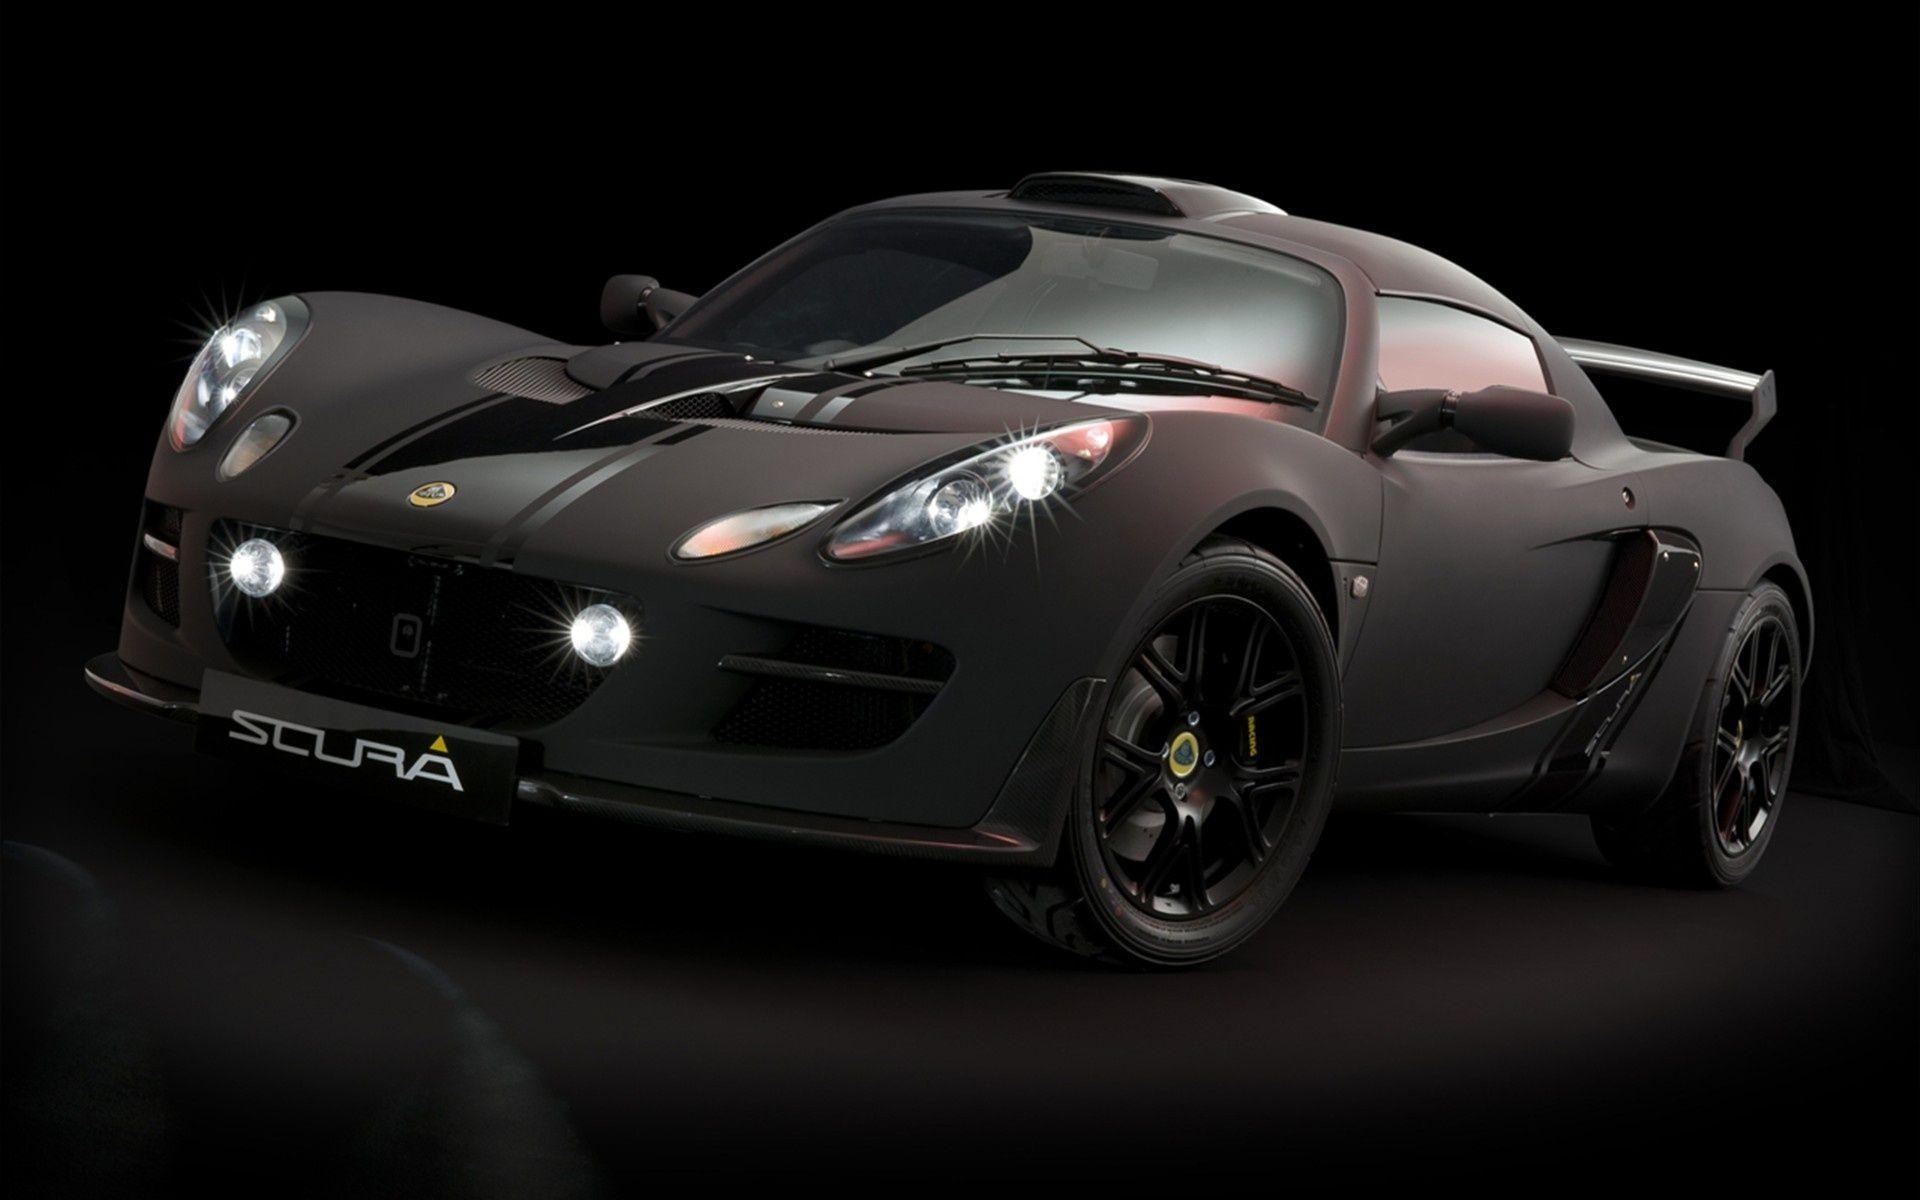 Lotus cars photo download wallpaper for free download about 790